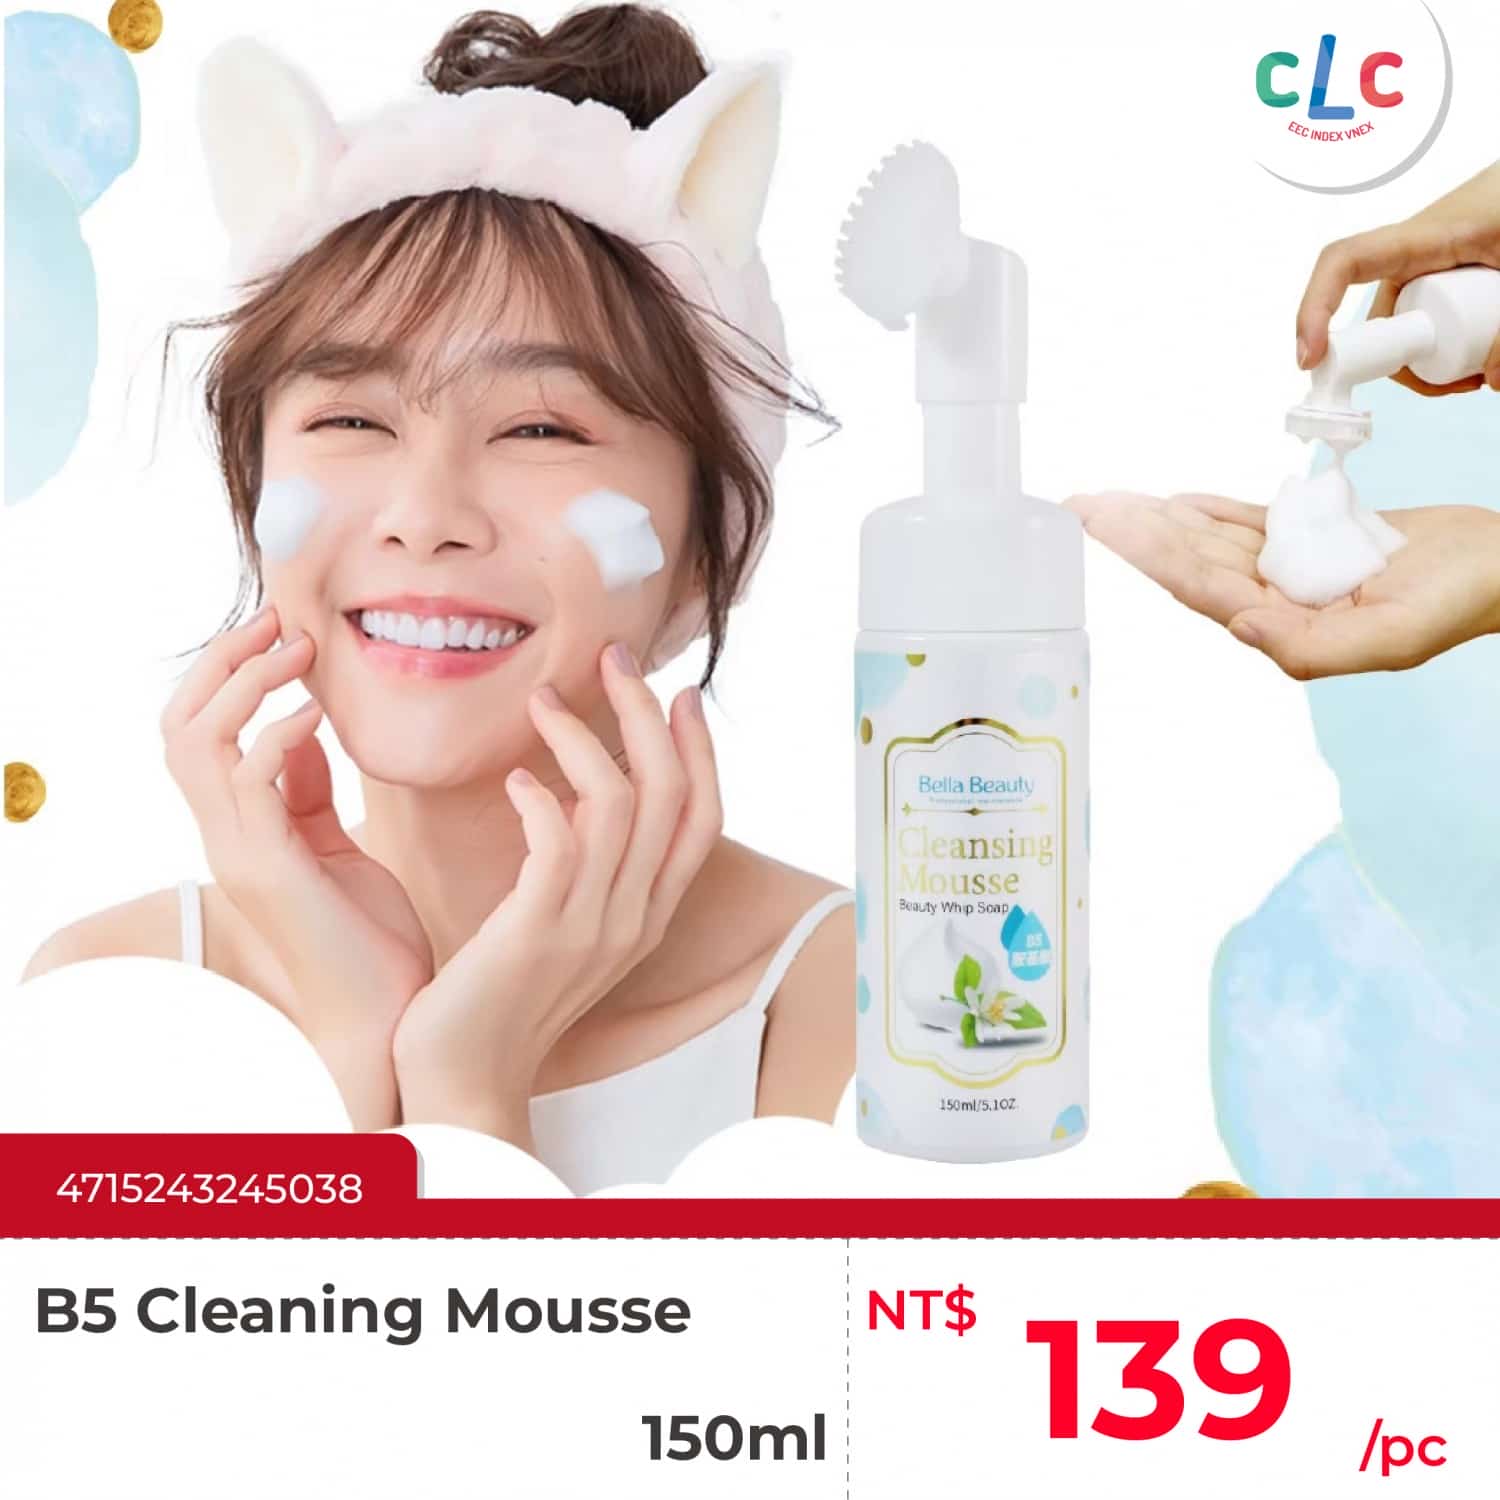 BELLA BEAUTY B5 Cleaning Mousse 150ml